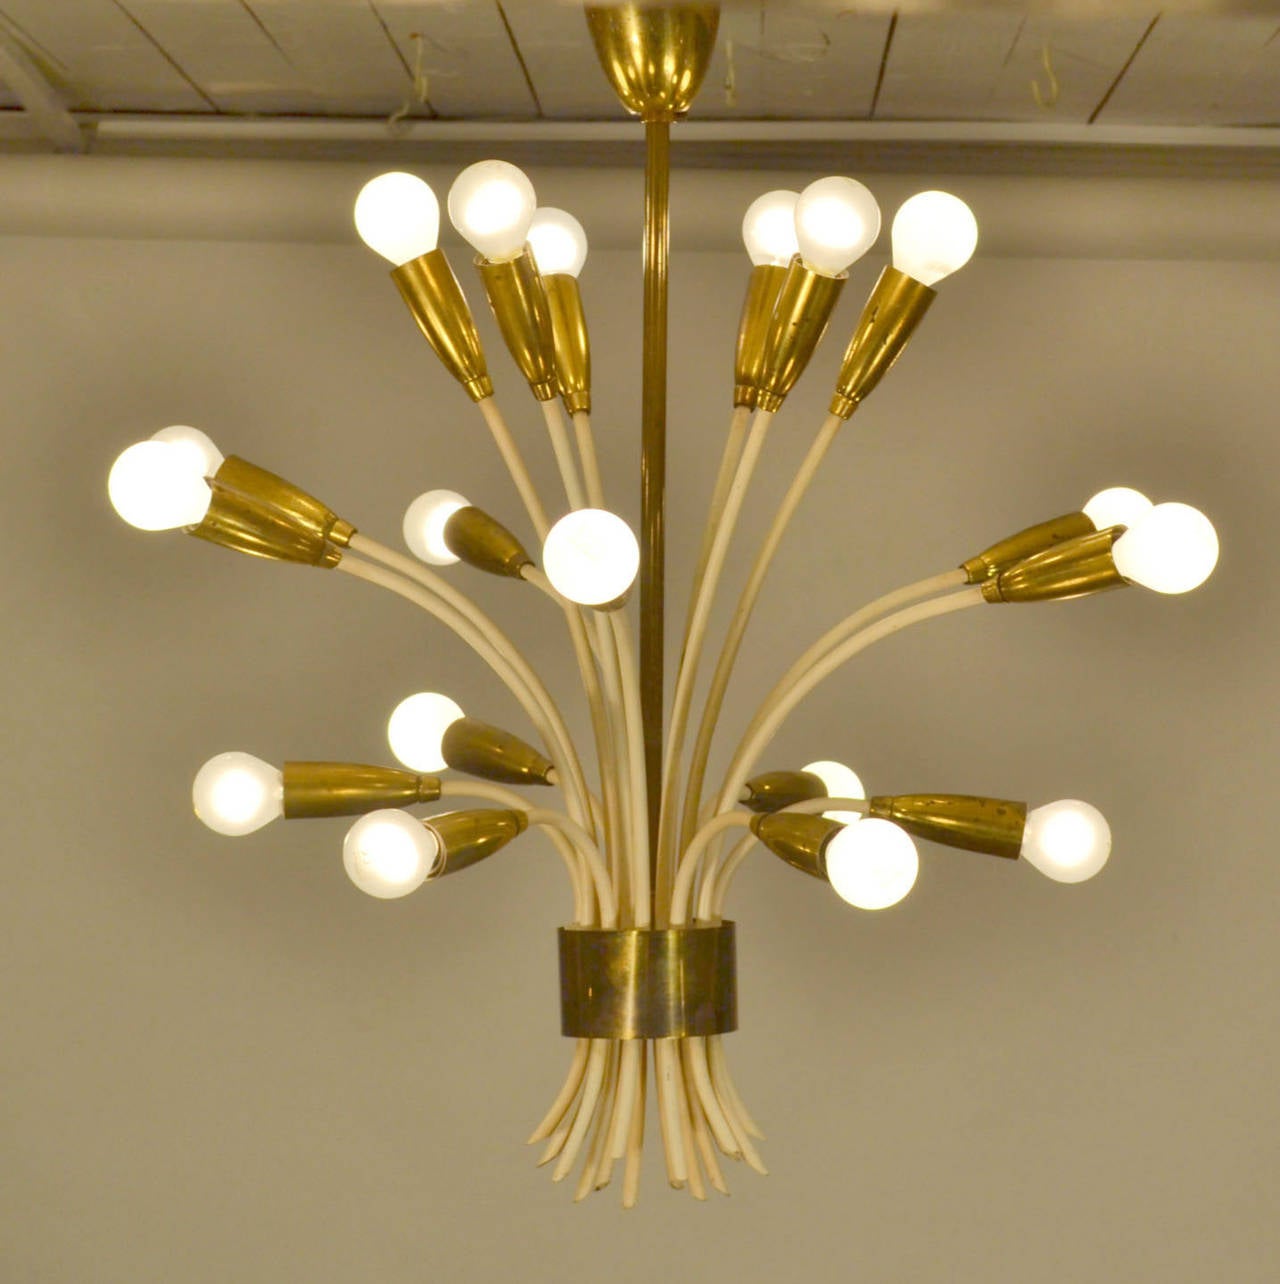 Chandelier in the shape of flowers. An array of 18 individual cream metal stems from around the center is hold together by a ring brass border.